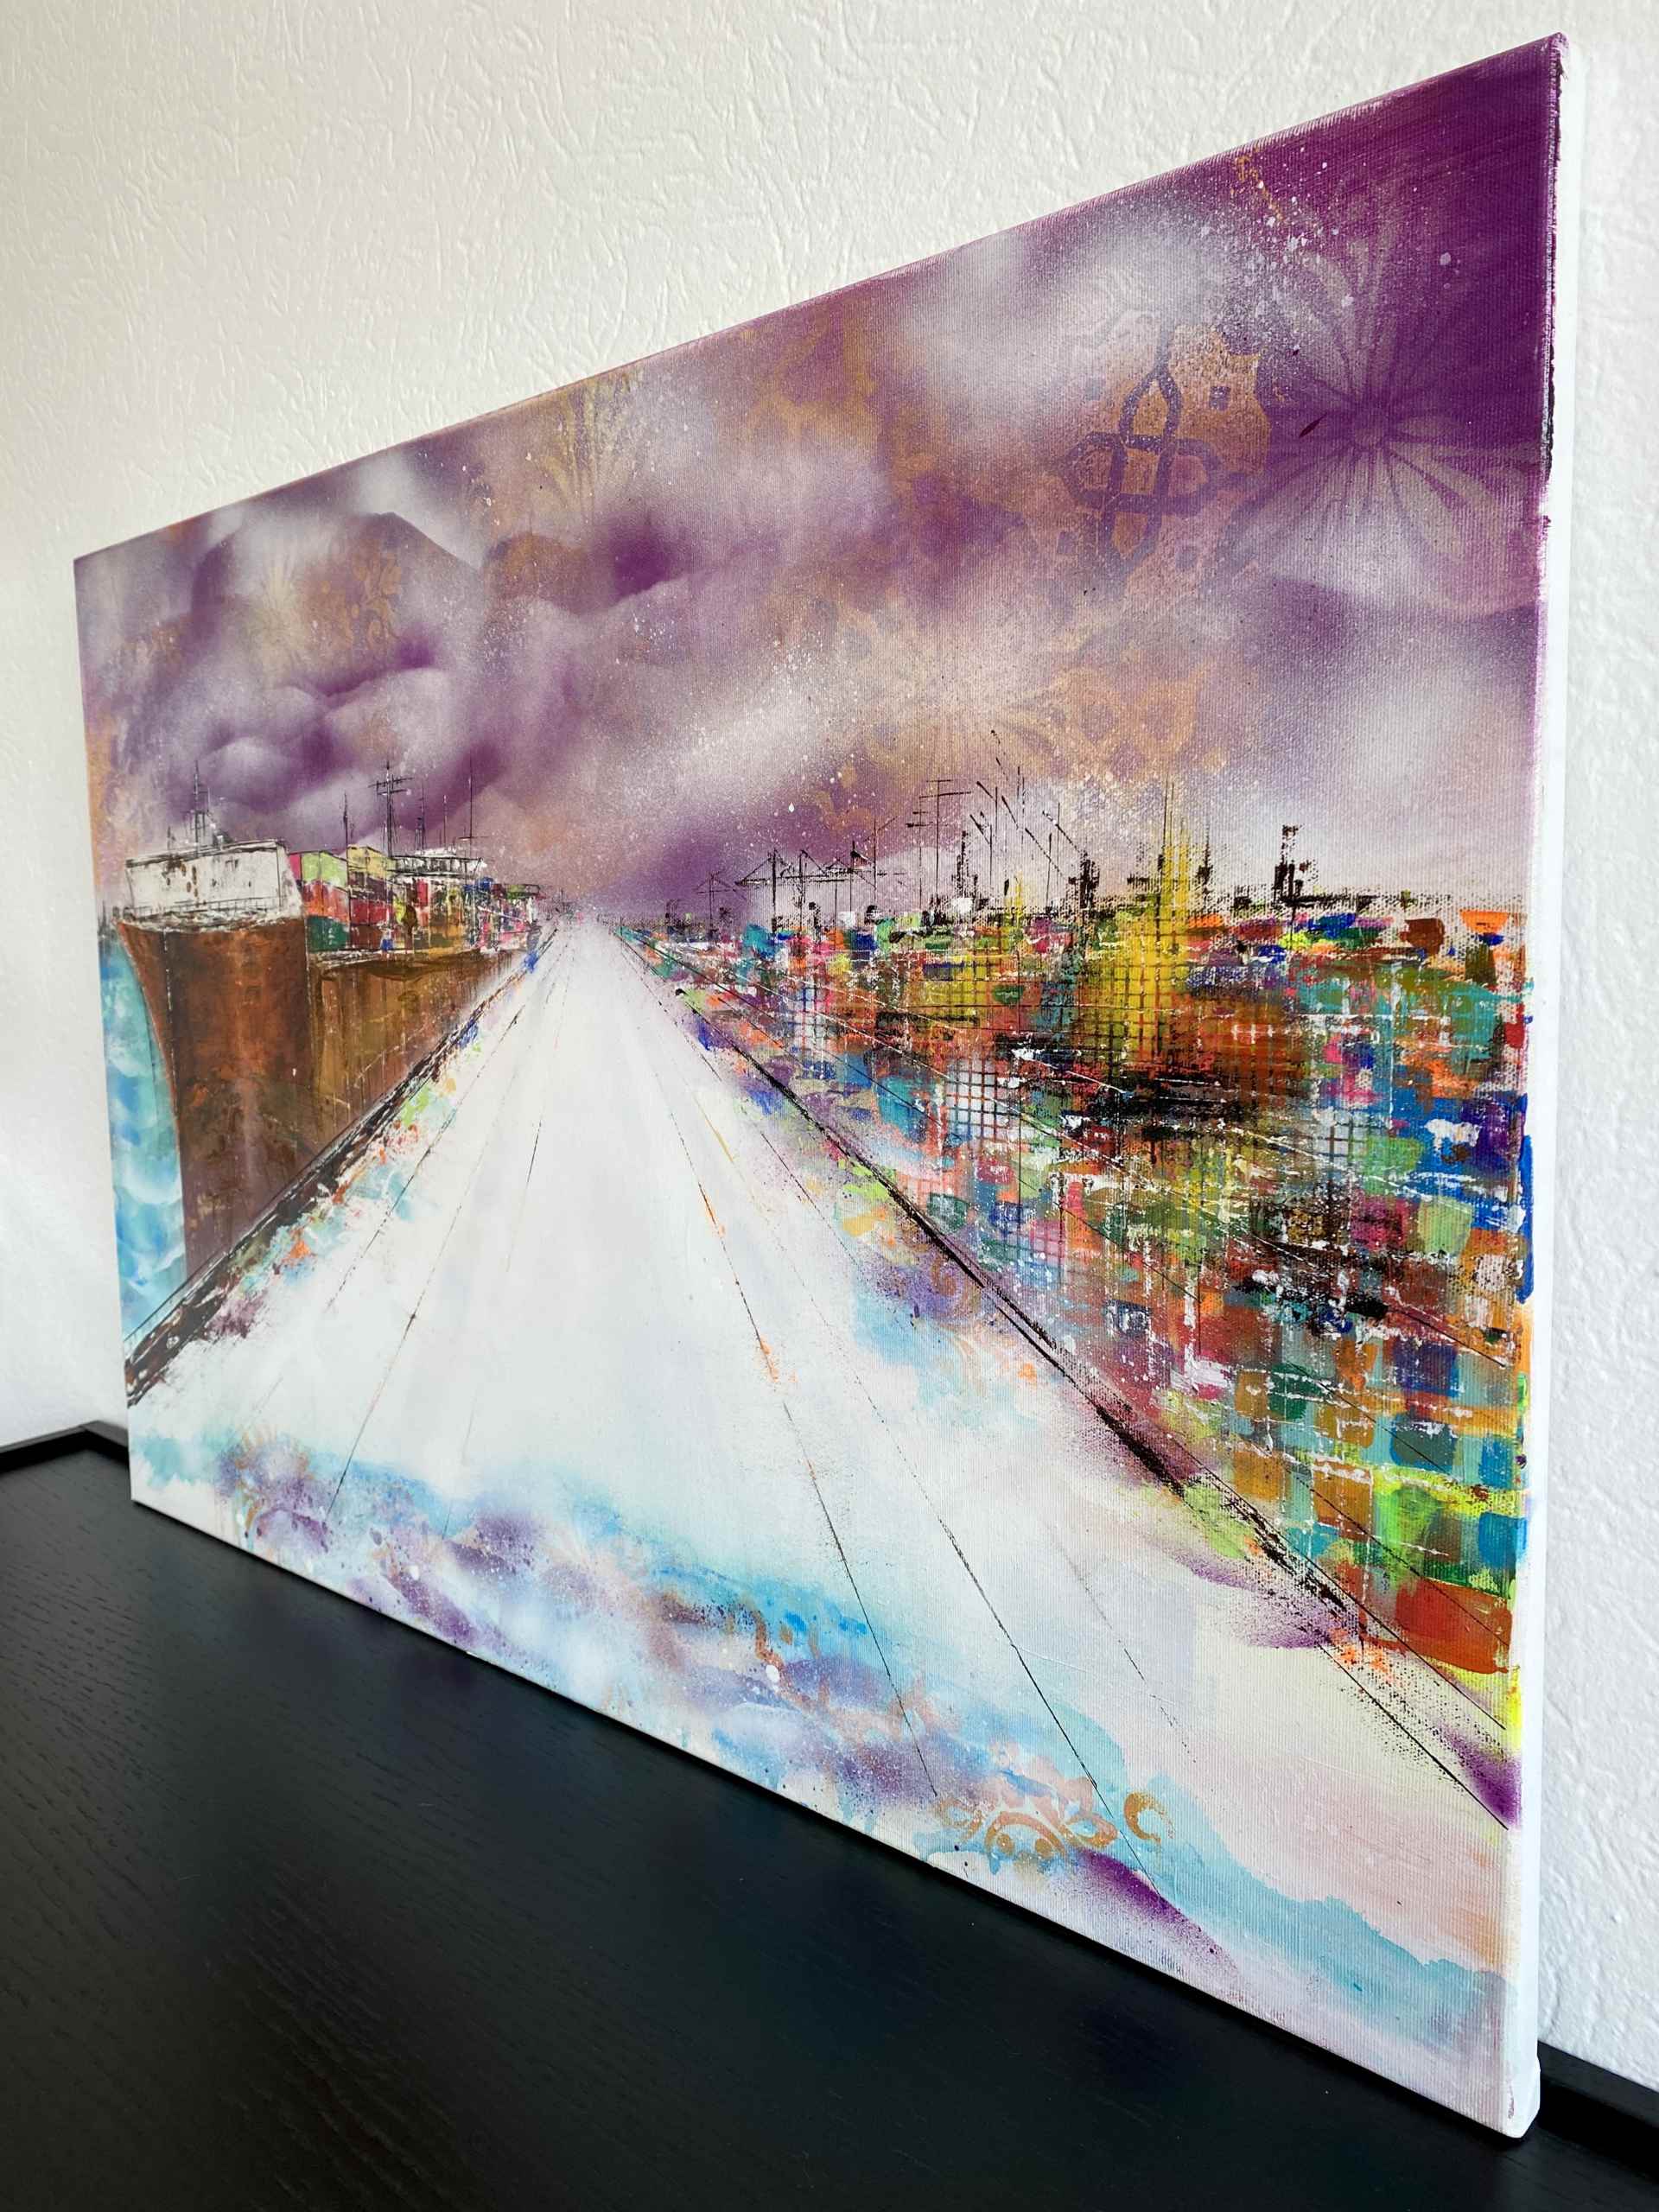 Side view of artwork "Purple Clouds" by Nina Groth